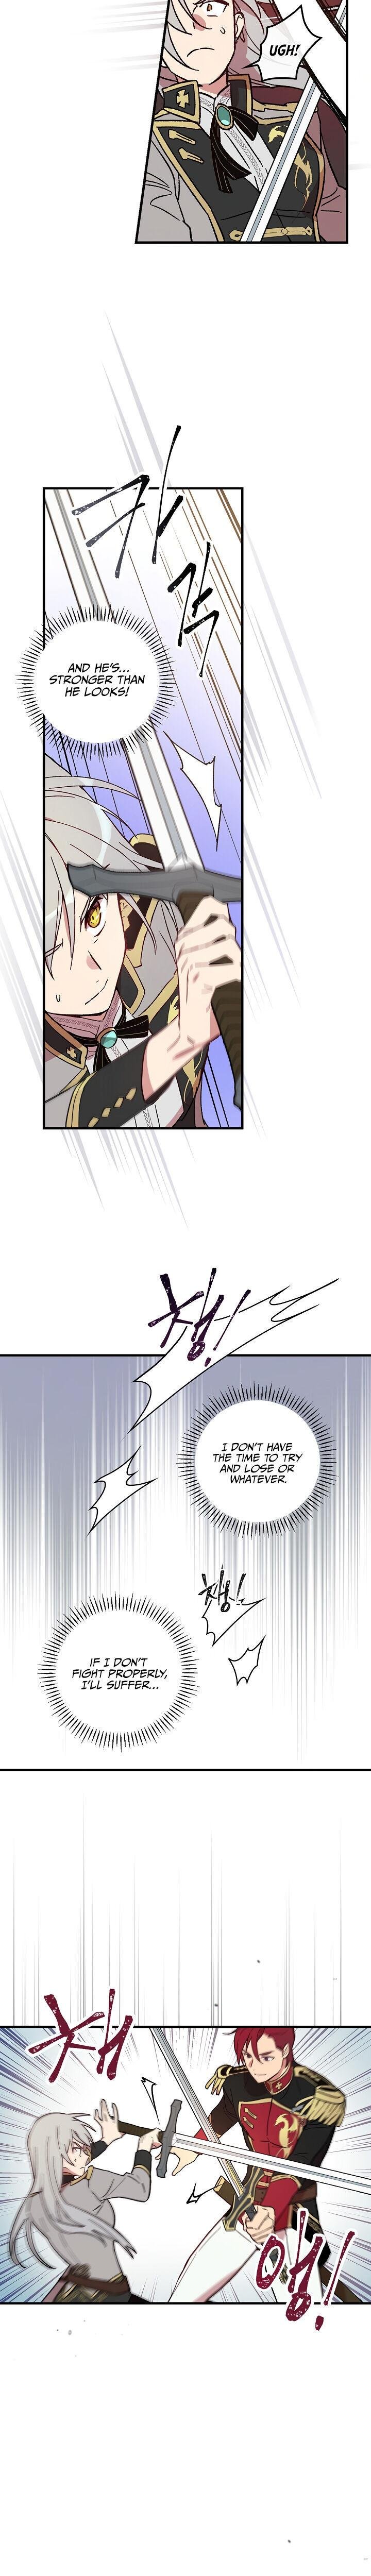 a-red-knight-does-not-blindly-follow-money-chap-4-26